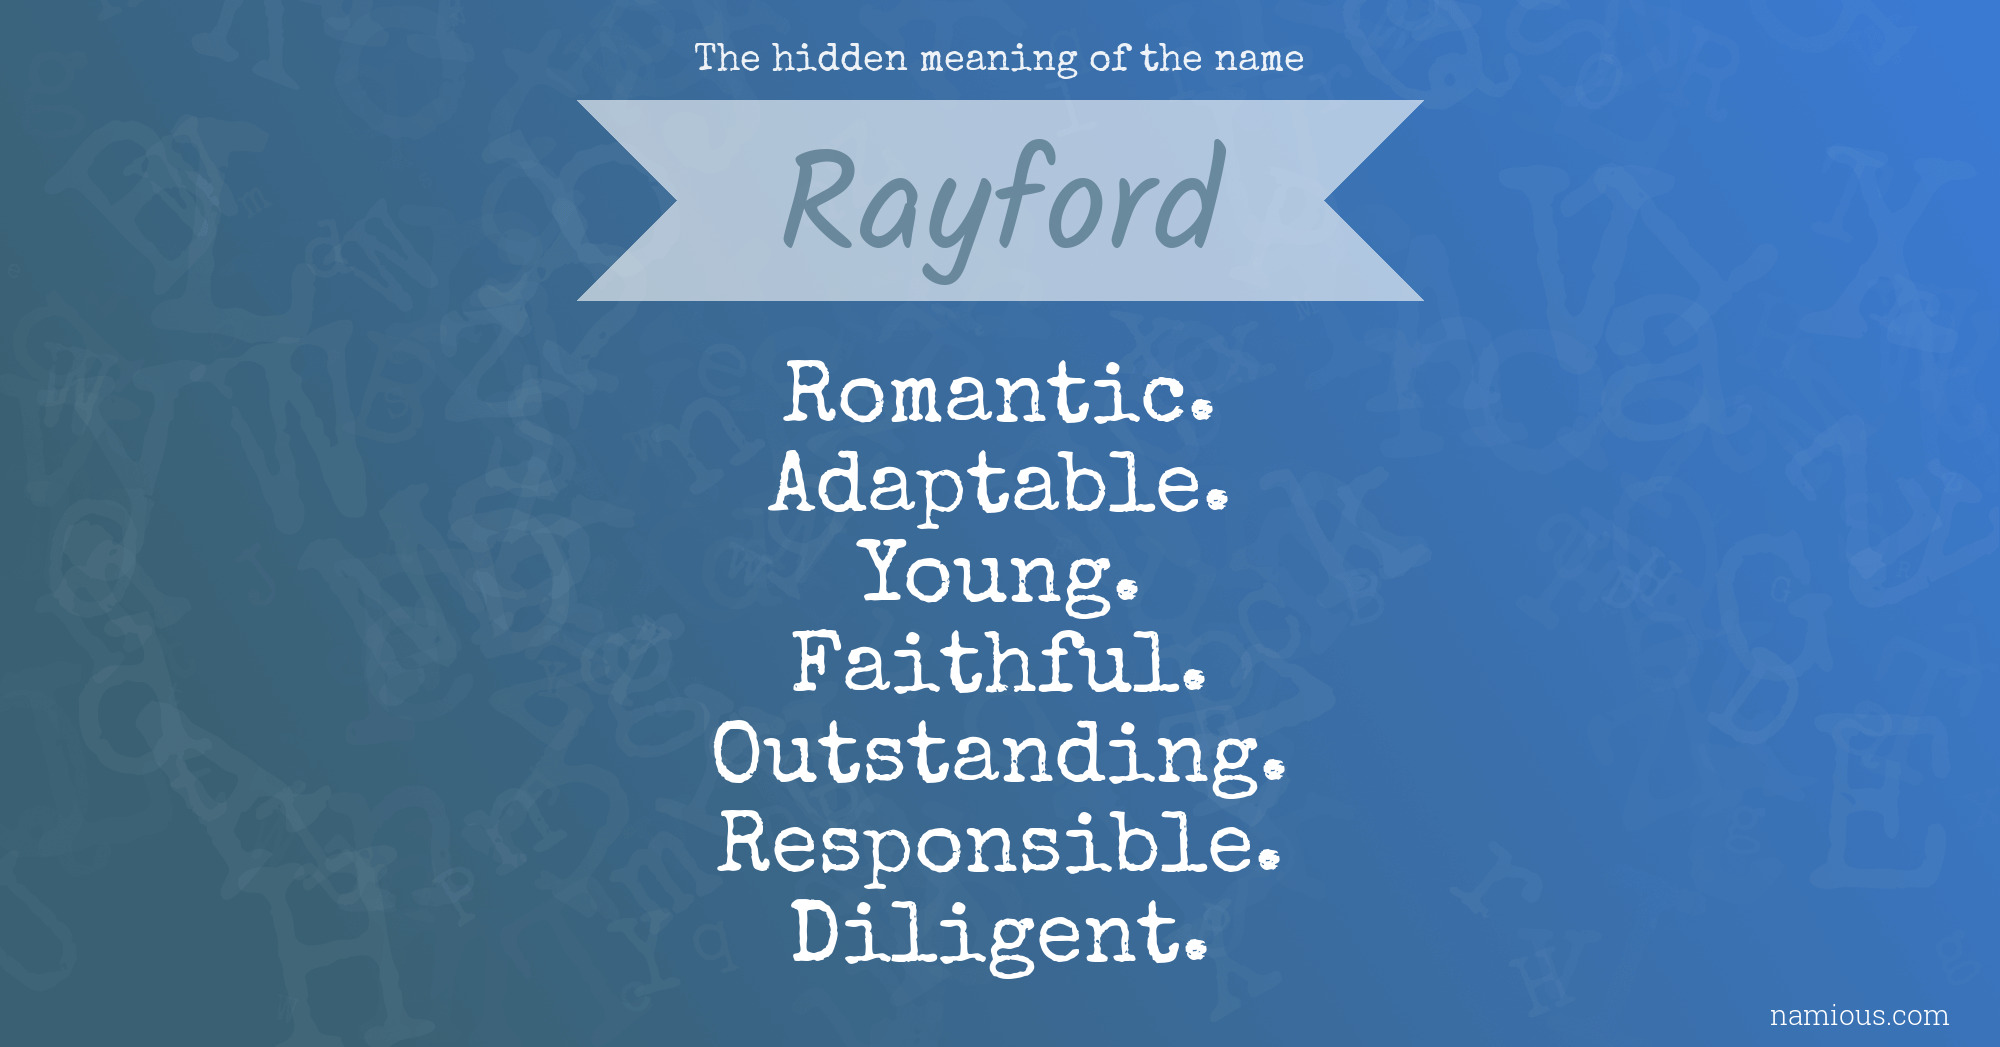 The hidden meaning of the name Rayford